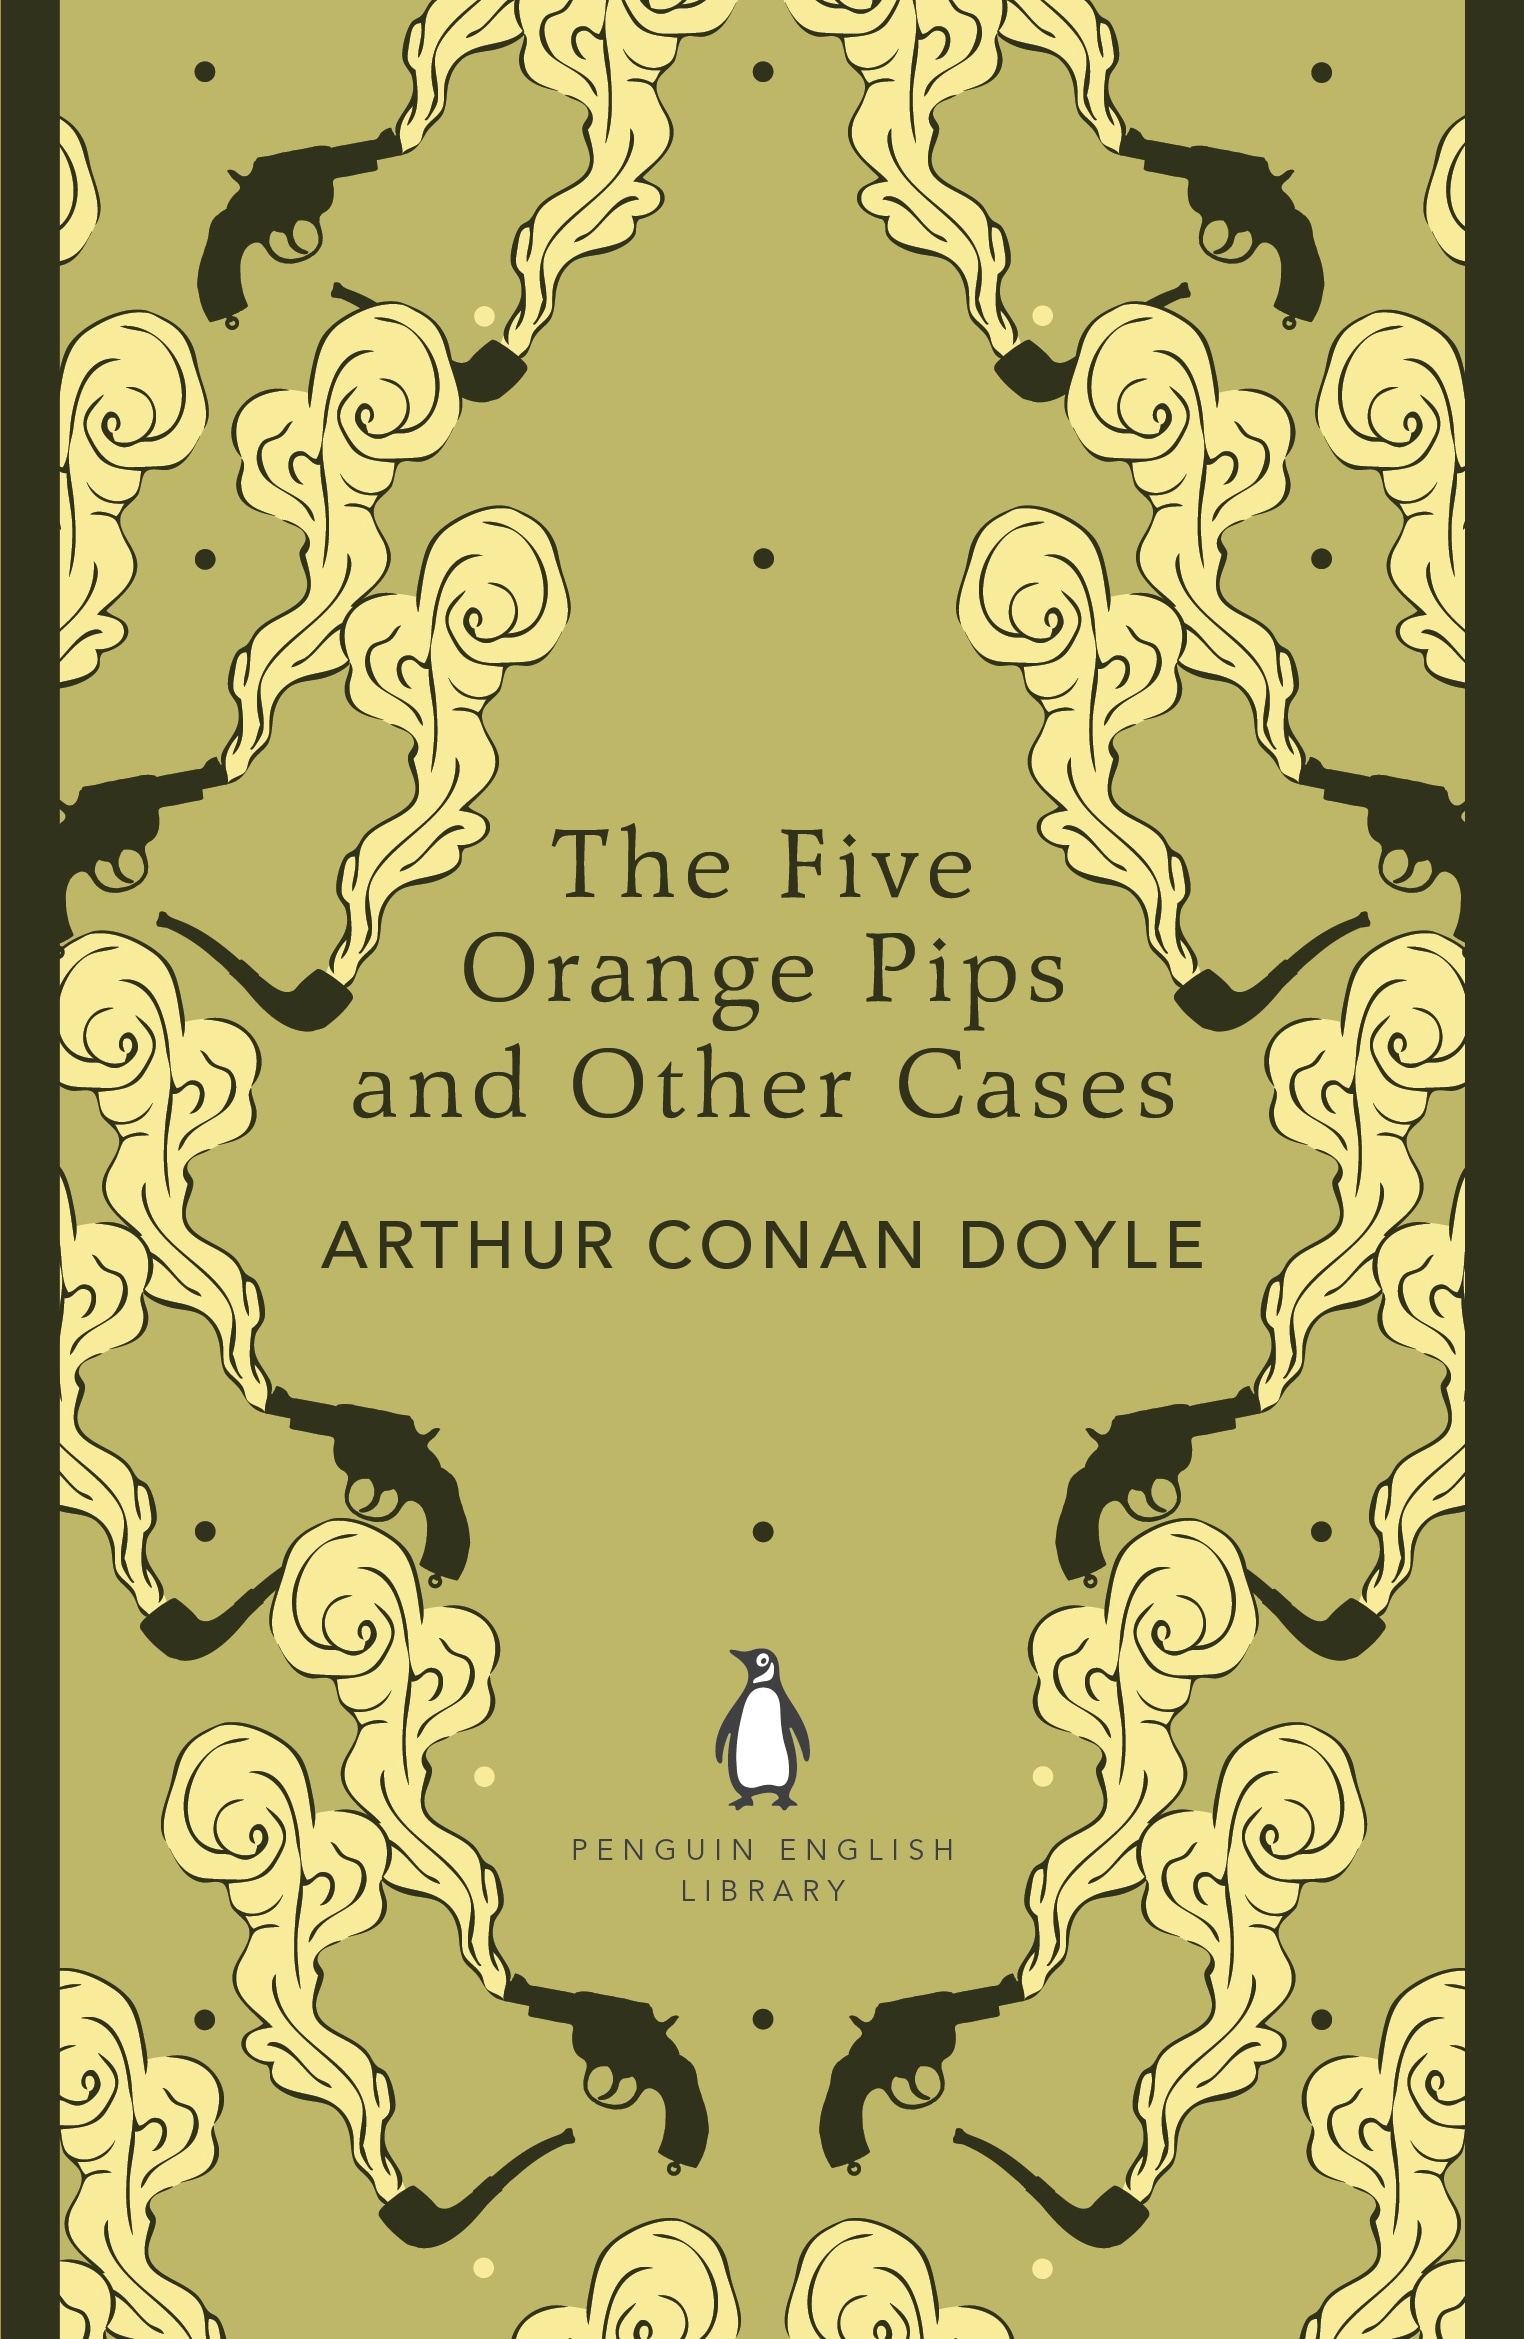 Book “The Five Orange Pips and Other Cases” by Arthur Conan Doyle — August 30, 2012